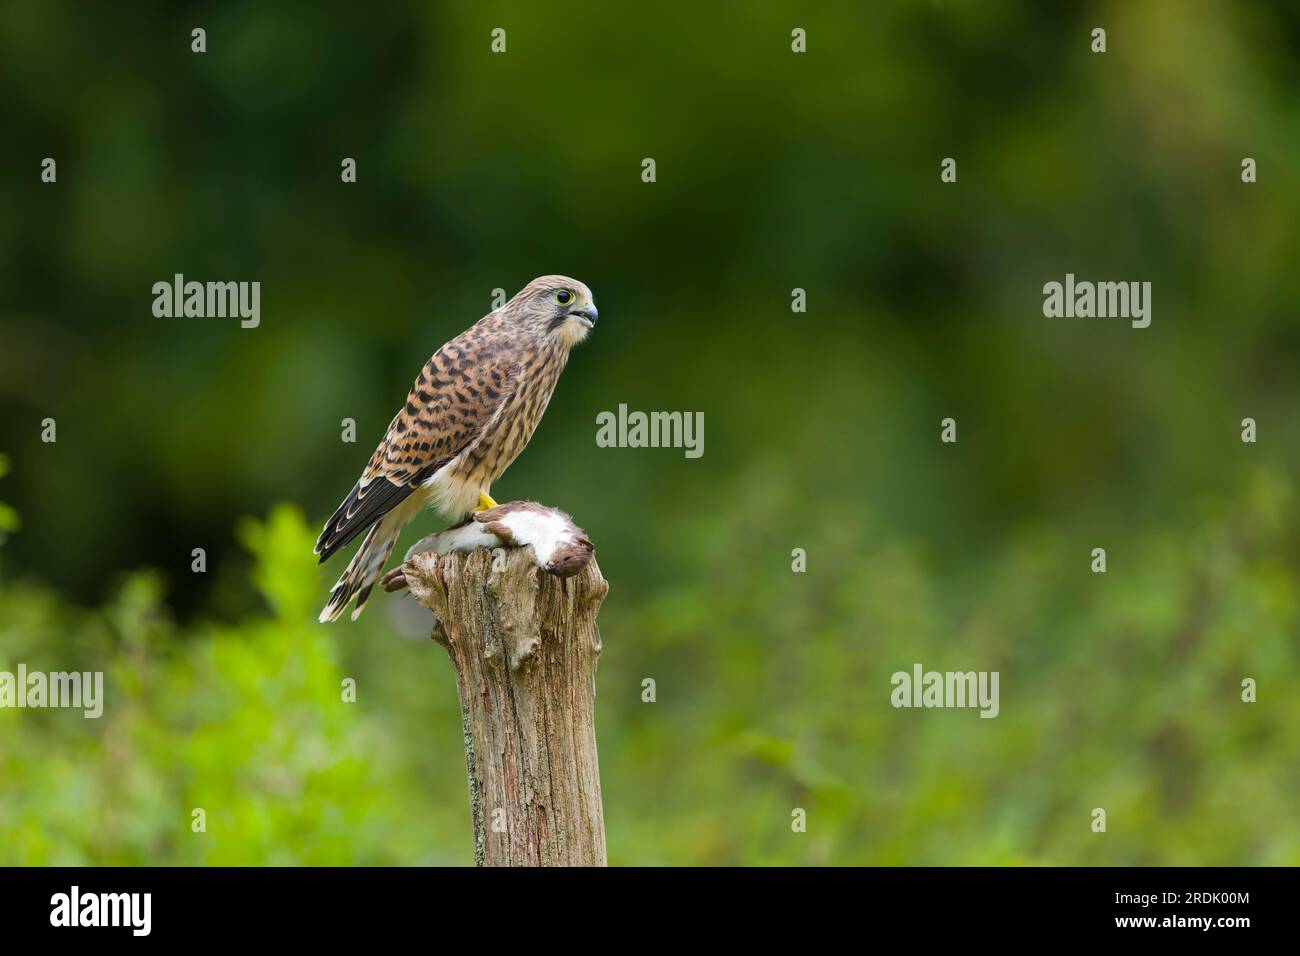 Common kestrel Falco tinnunculus, juvenile perched on post with Weasel Mustela nivalis, prey, Suffolk, England, July Stock Photo